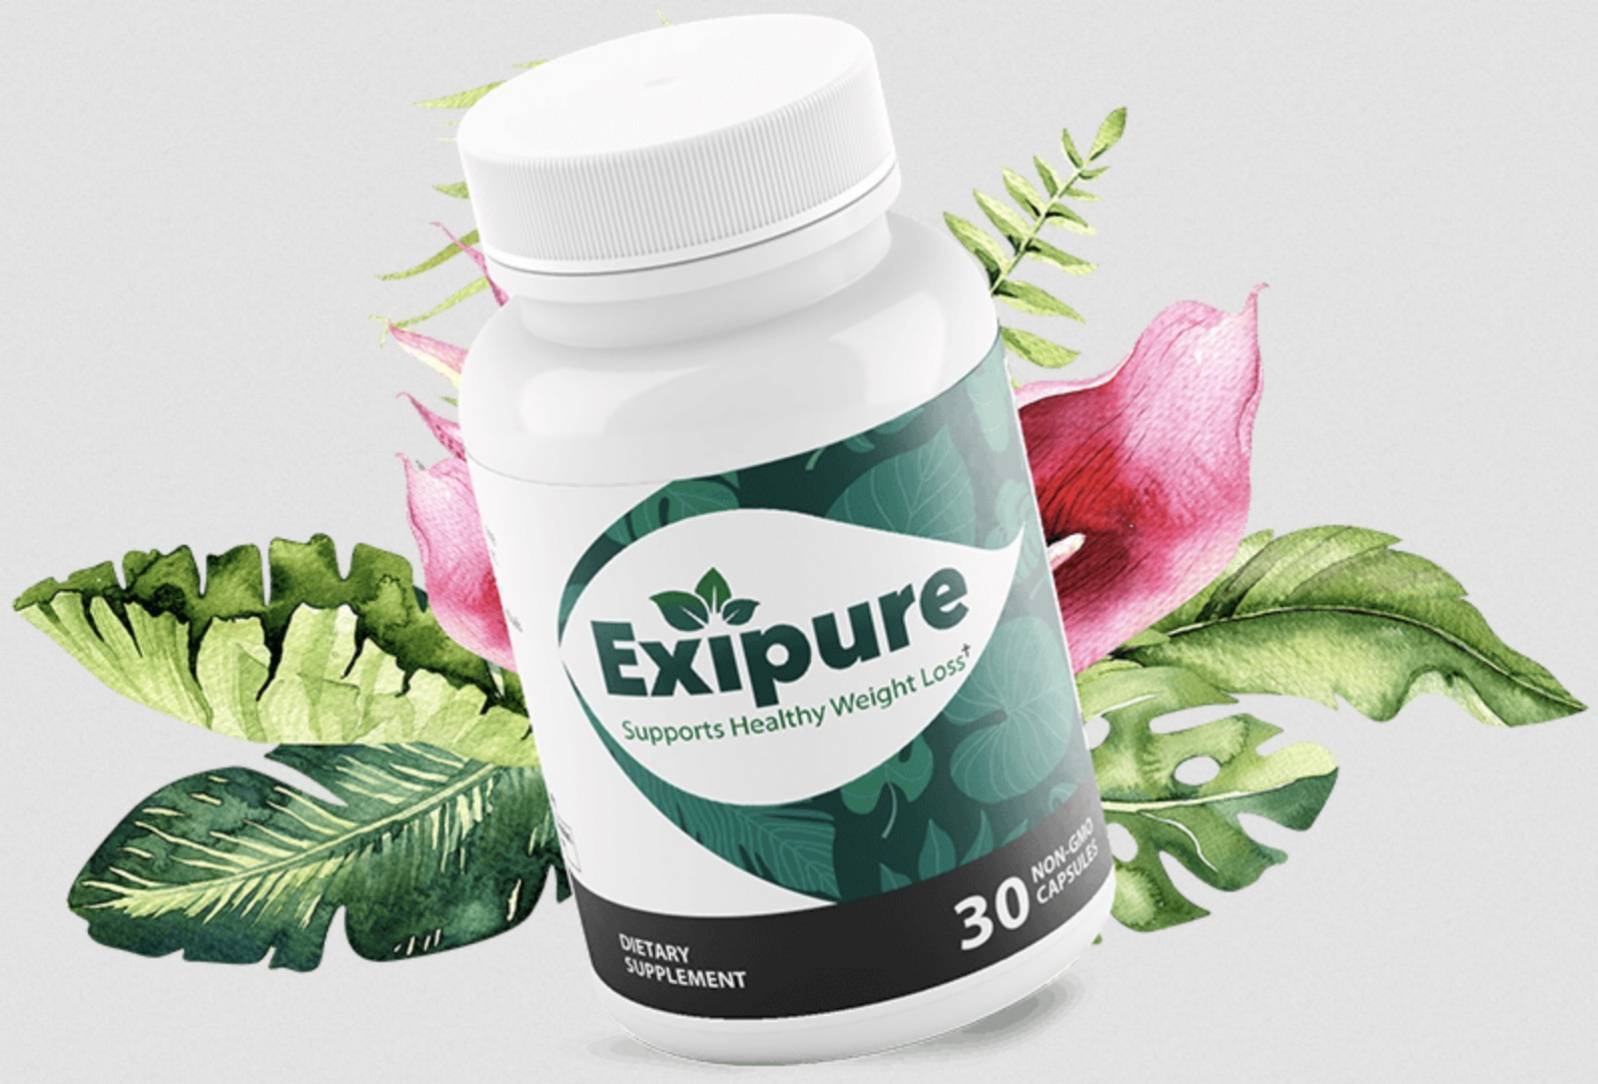 Is Exipure A Legitimate Weight Loss Product